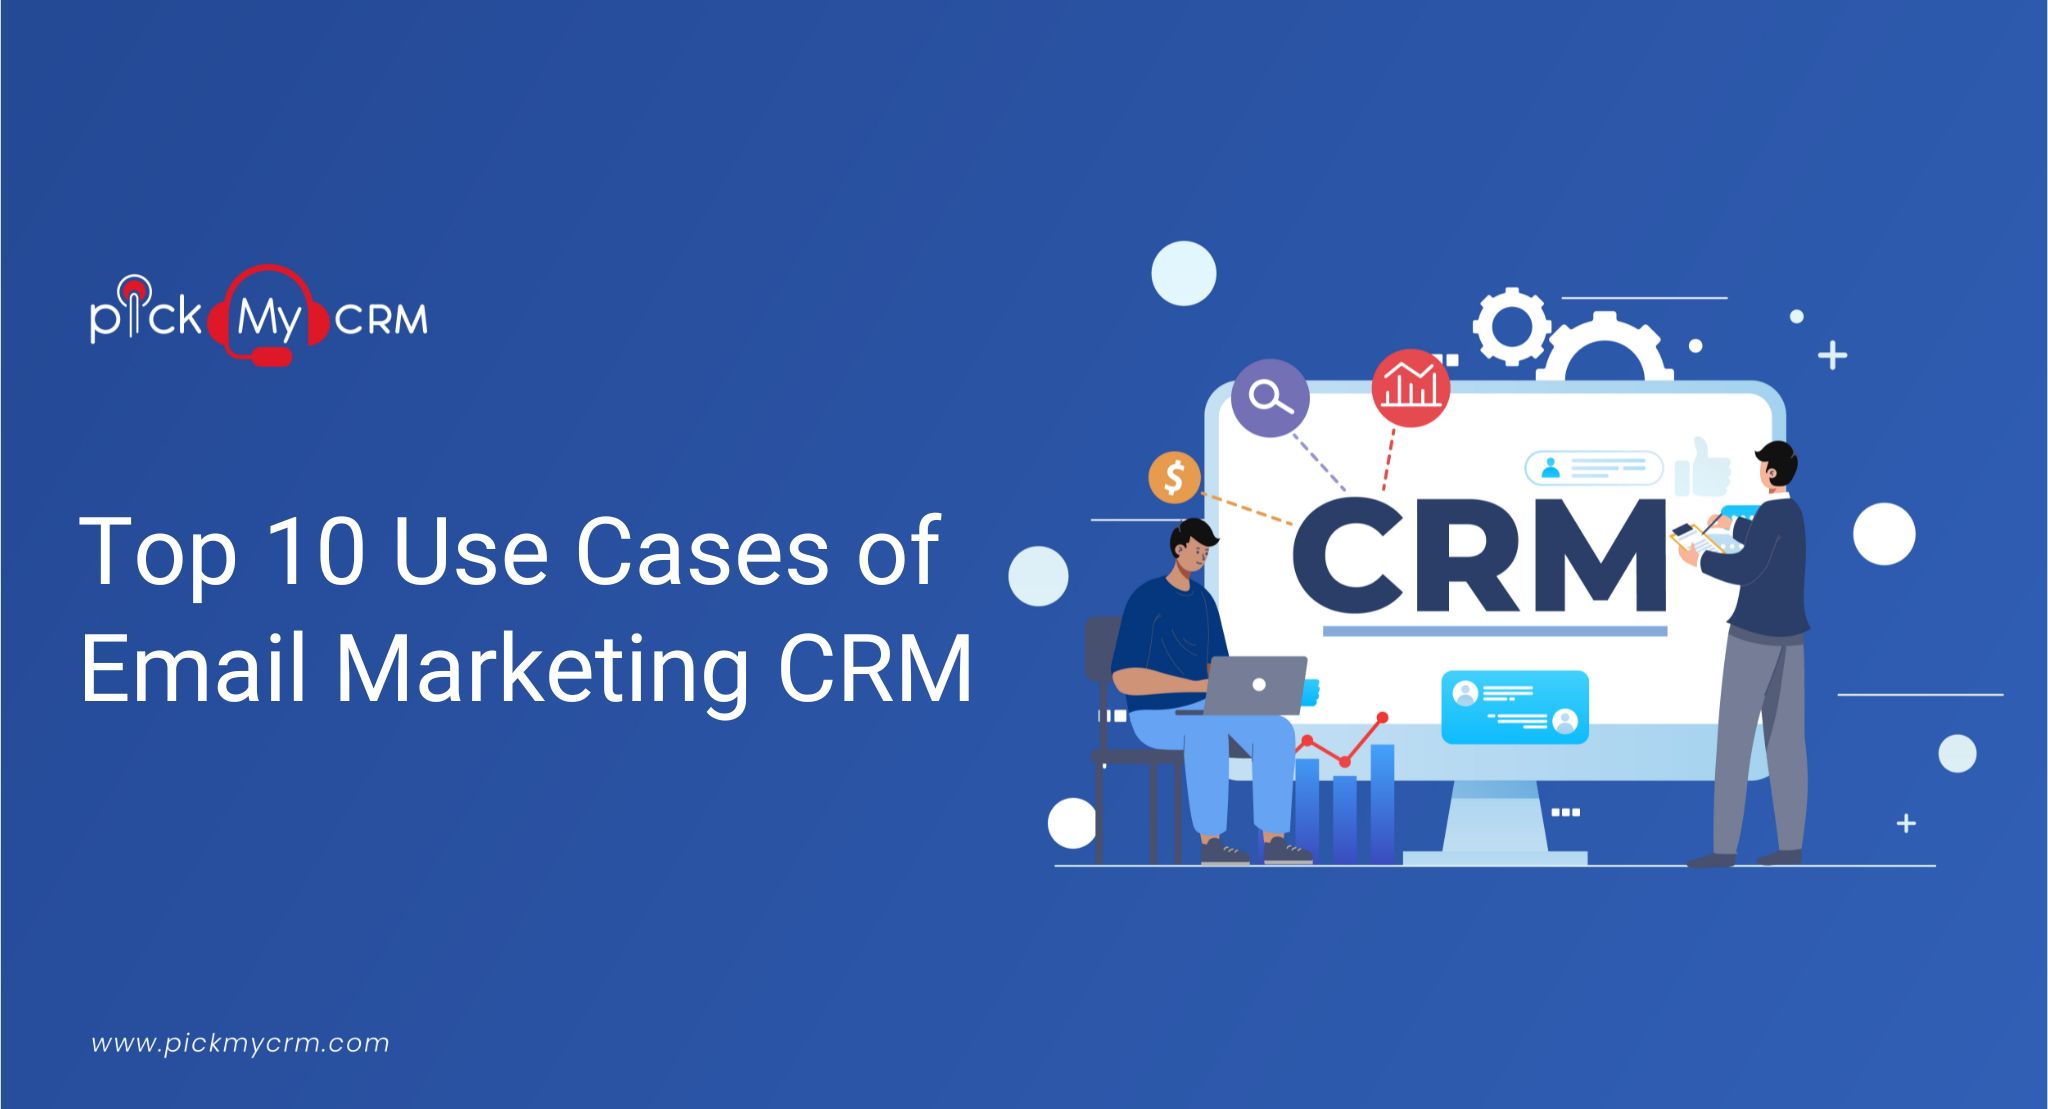 Top 10 Use Cases of Email Marketing CRM